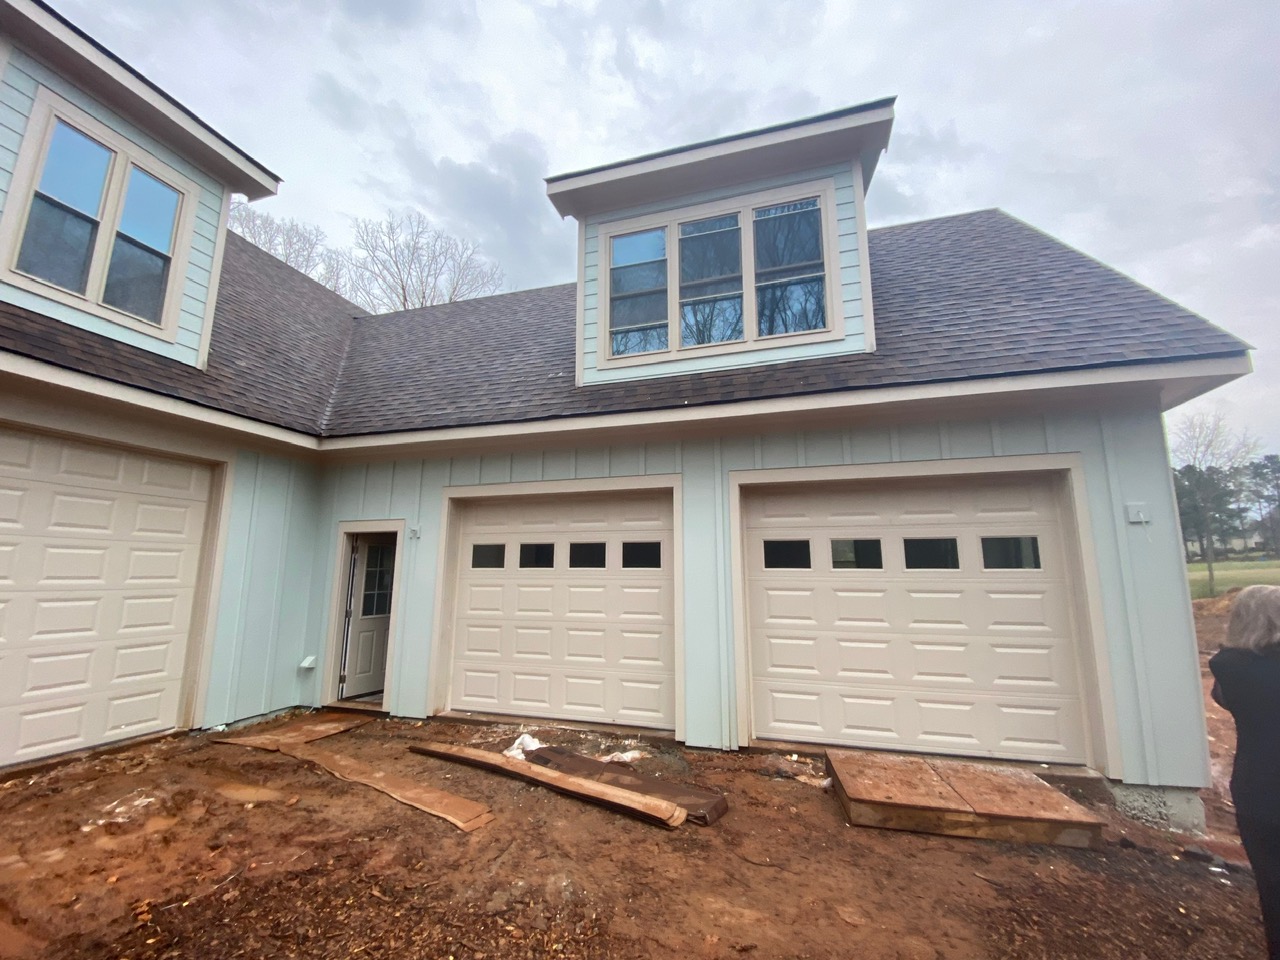 Two traditional off-white raised-panel garage doors on seafoam green house with unfinished driveway.